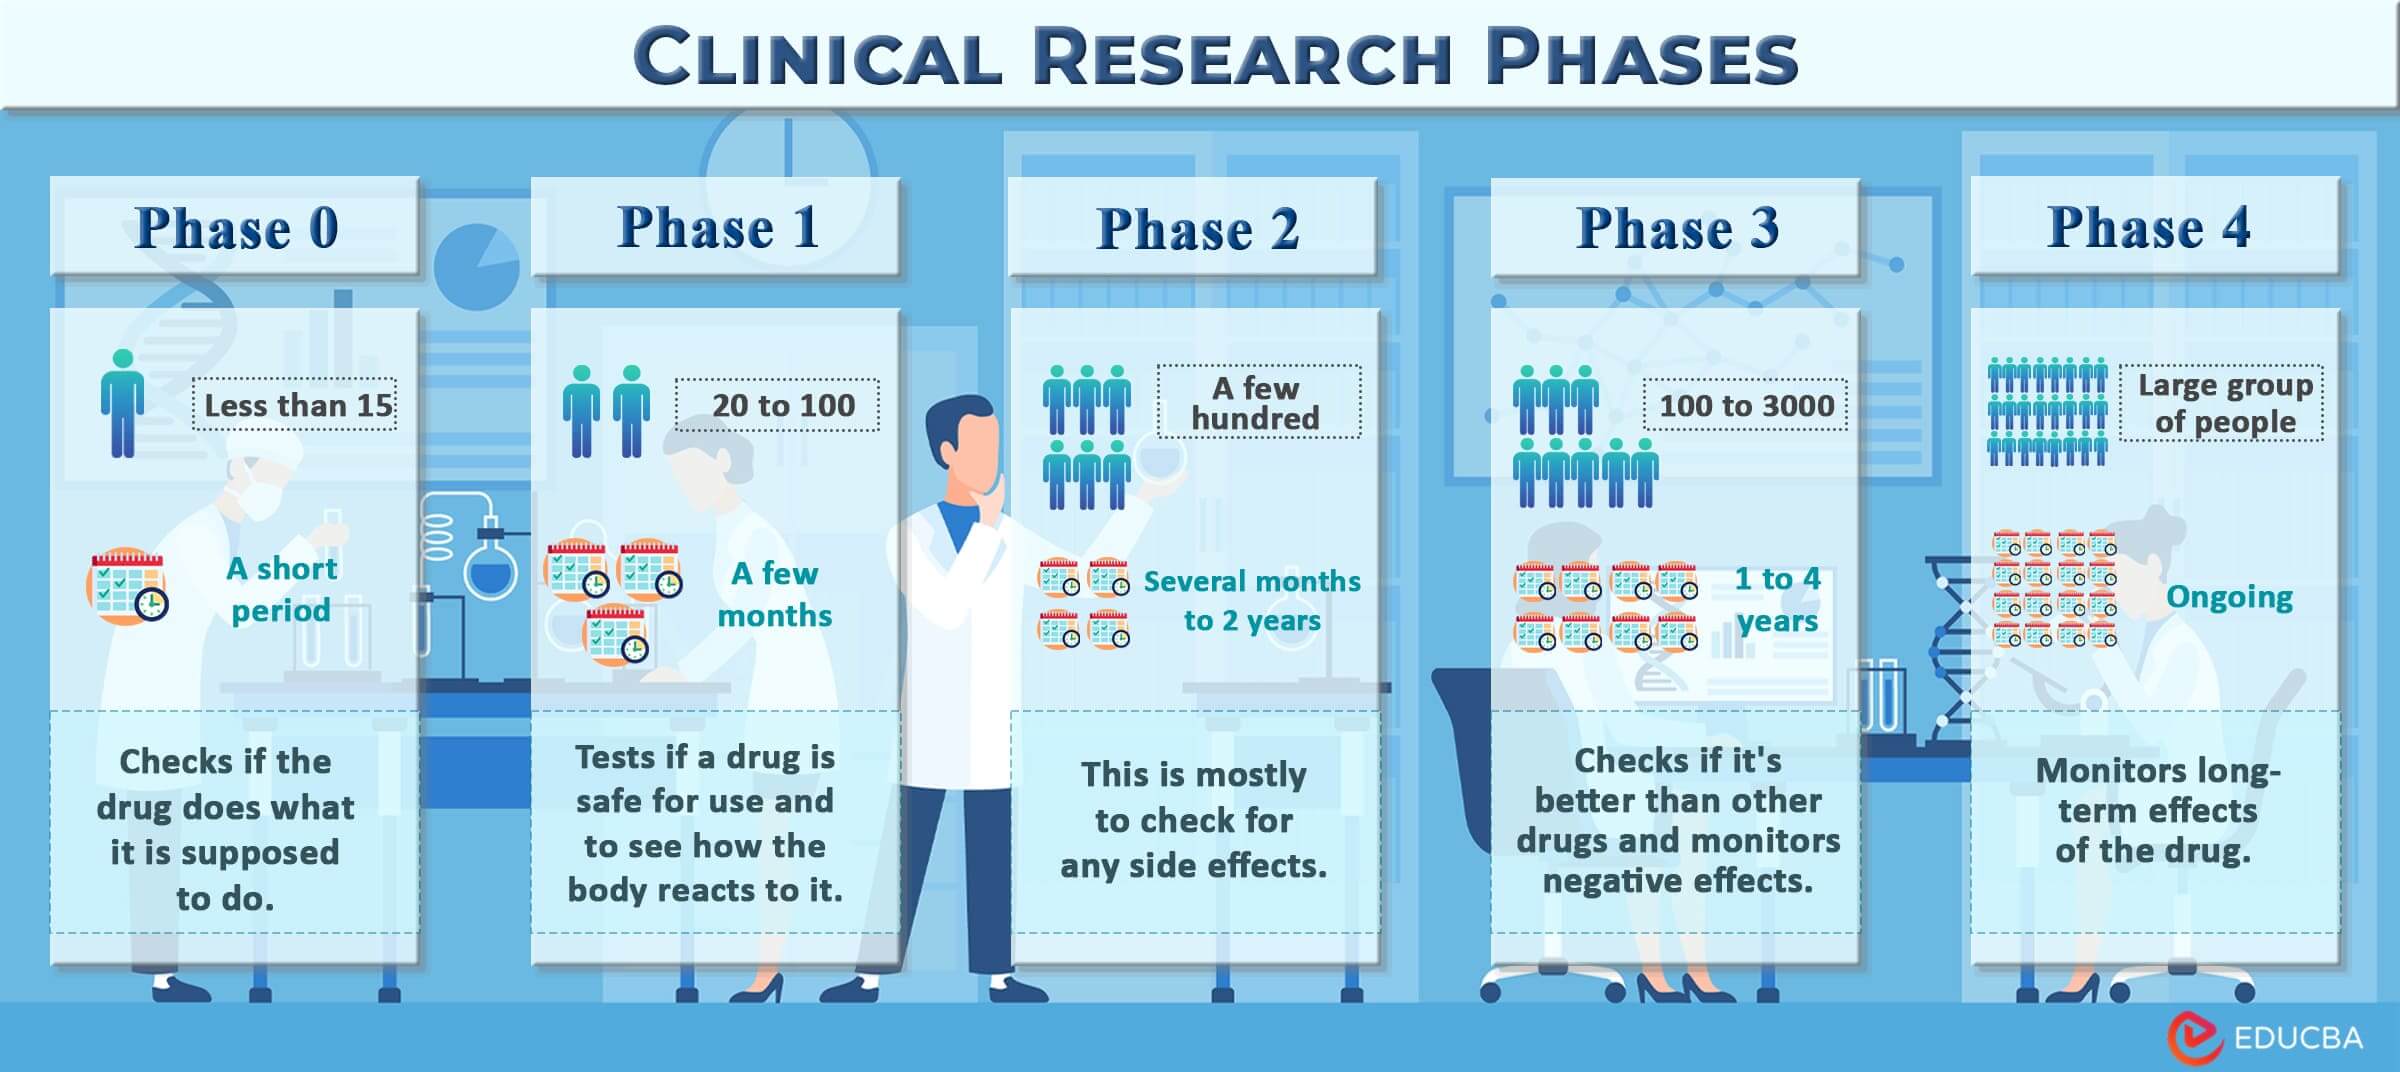 Phases of Clinical Research